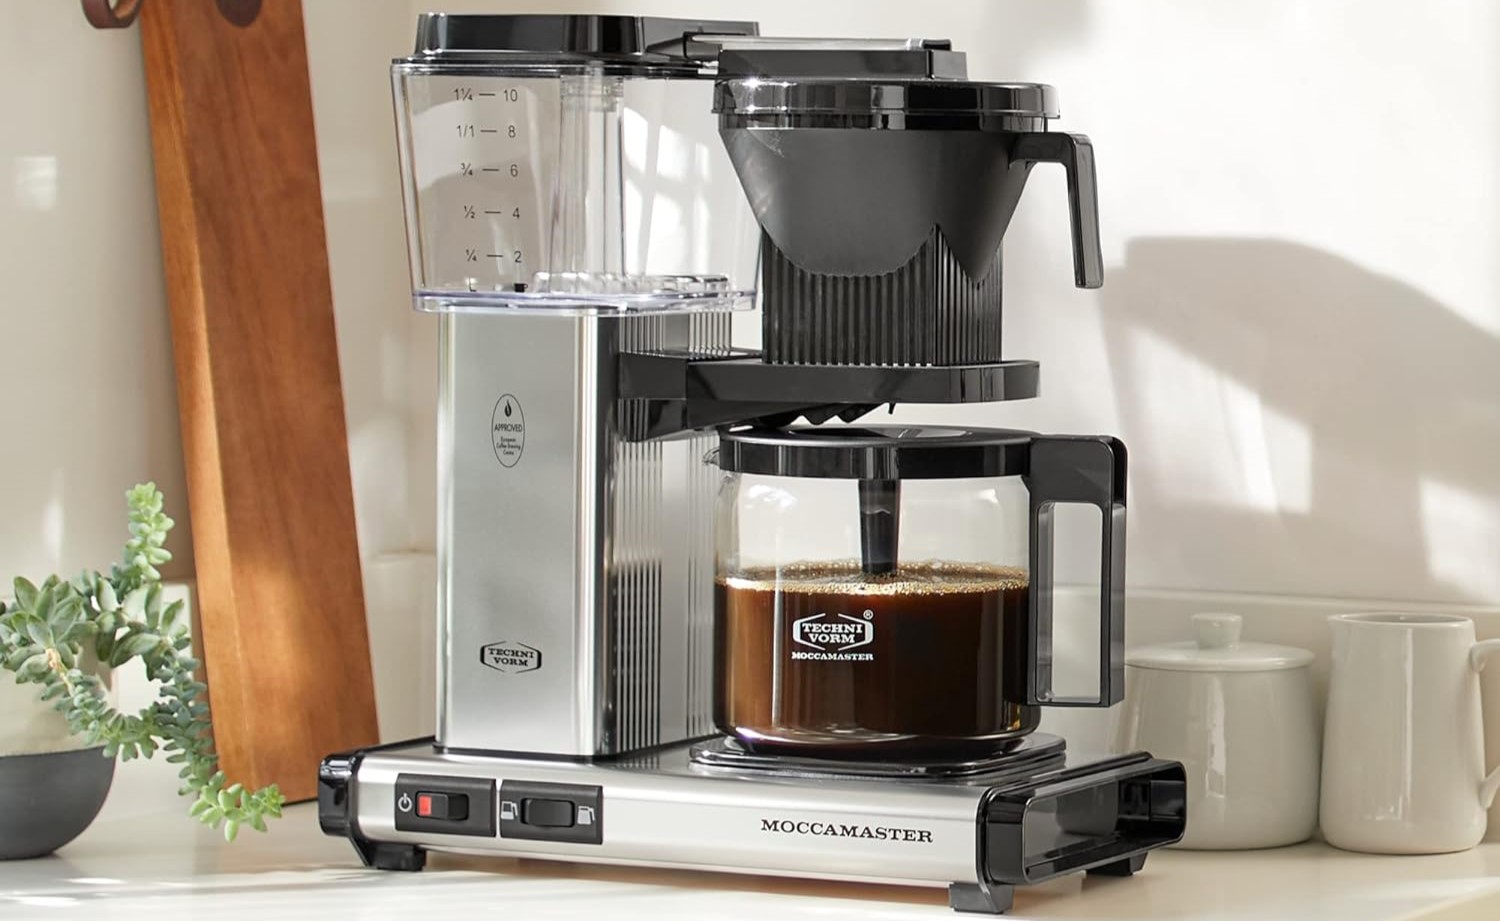 Espresso your love with these 12 wonderful gift ideas for the coffee lover in your life